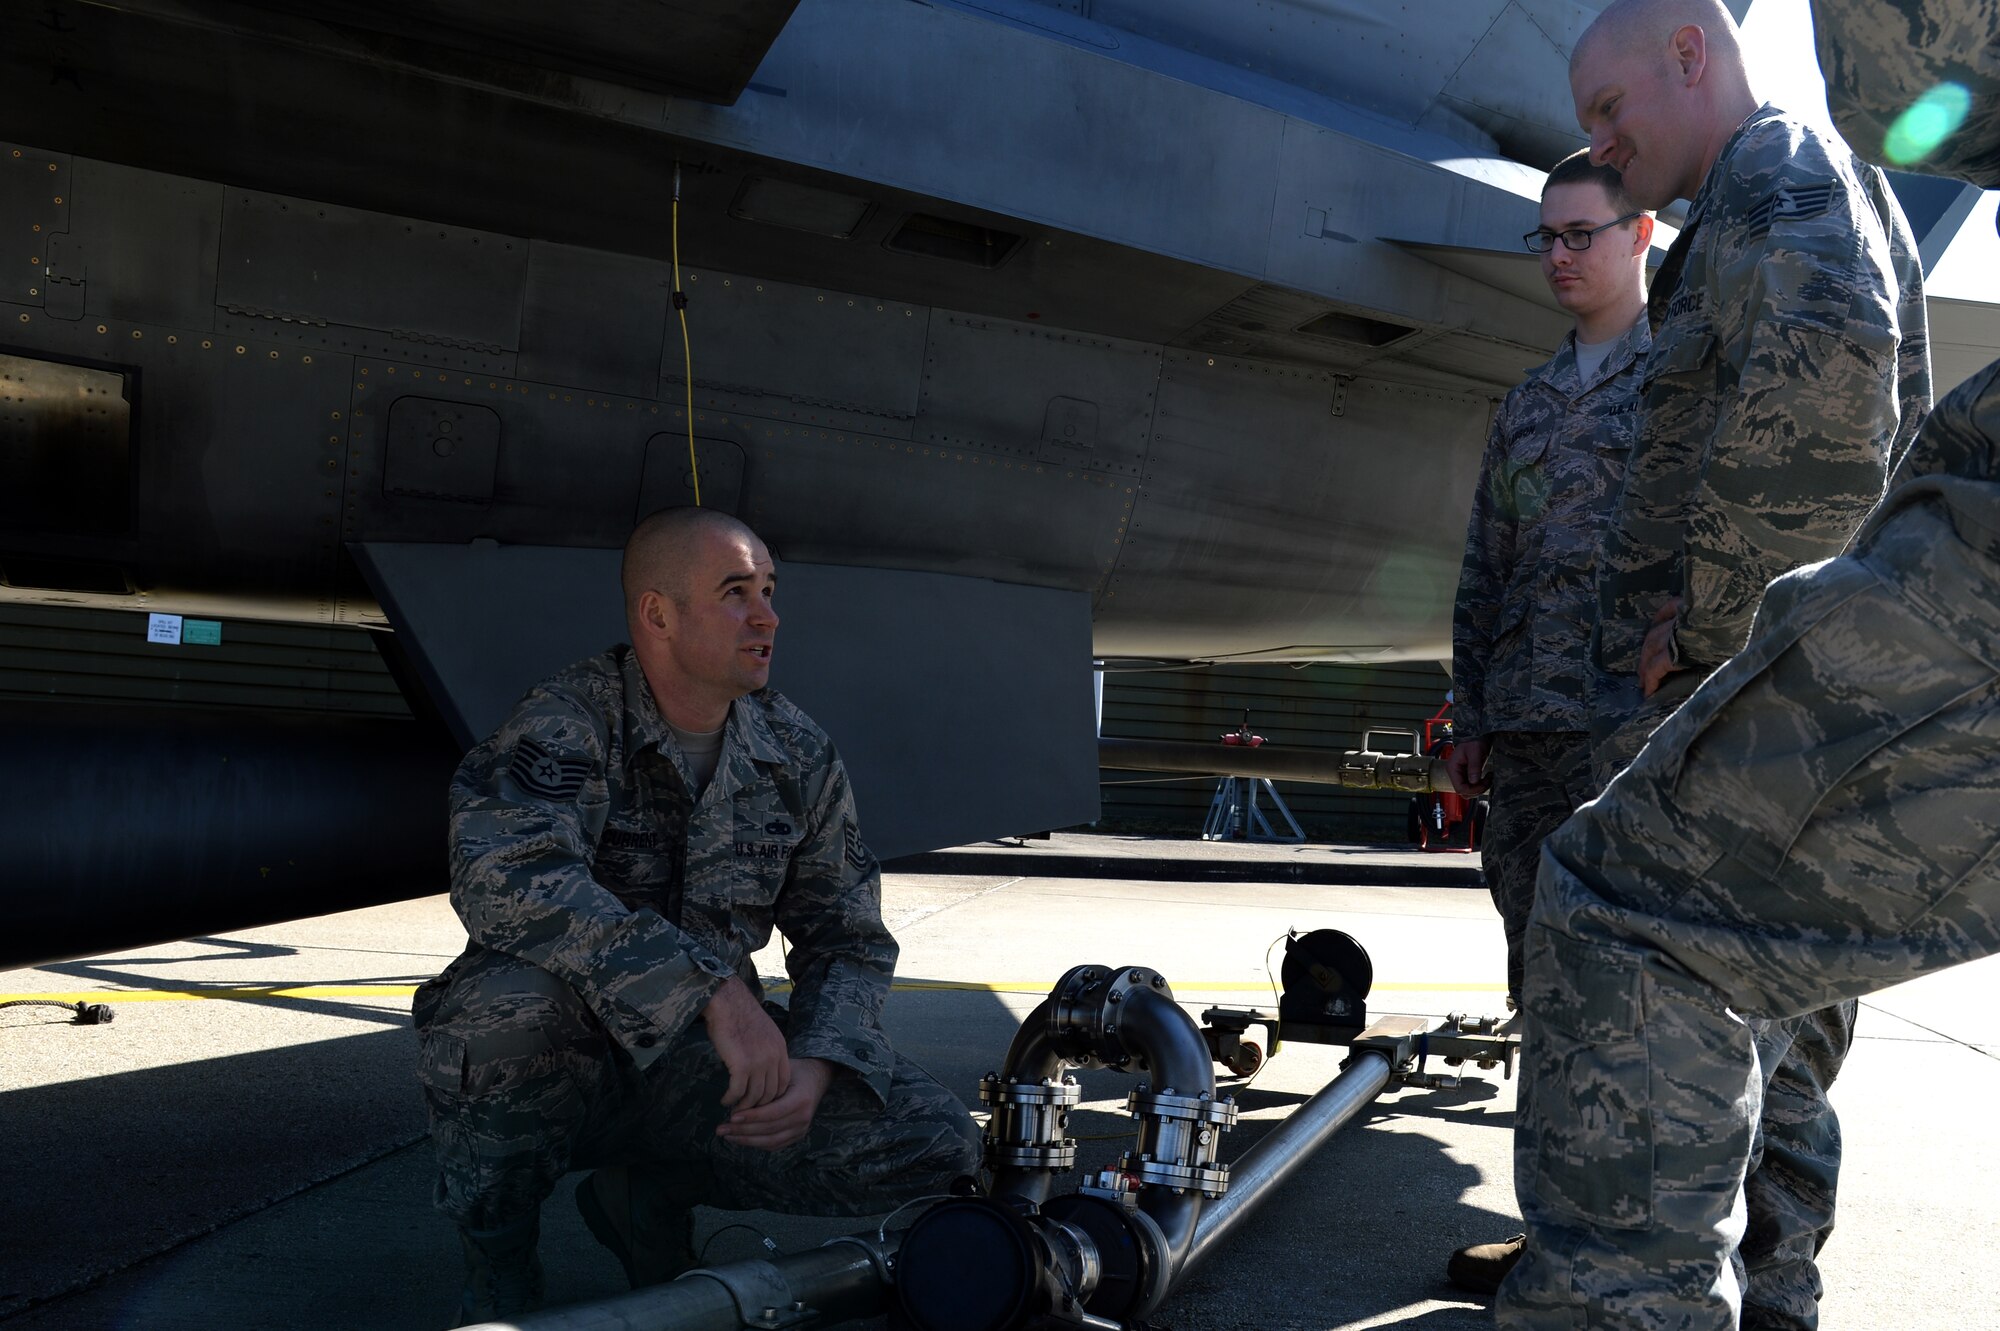 U.S. Air Force Tech. Sgt. Jeff Current, 52nd Maintenance Group maintenance operations F-16 Fighting Falcon fighter aircraft maintenance instructor and NCO in charge of instruction, briefs a class of Airmen responsible for fueling aircraft on hot pits at Spangdahlem Air Base, Germany, March 10, 2014. Hot pits are a procedure that allows aircraft to remain running while being refueled. (U.S. Air Force photo by Senior Airman Alexis Siekert/Released)